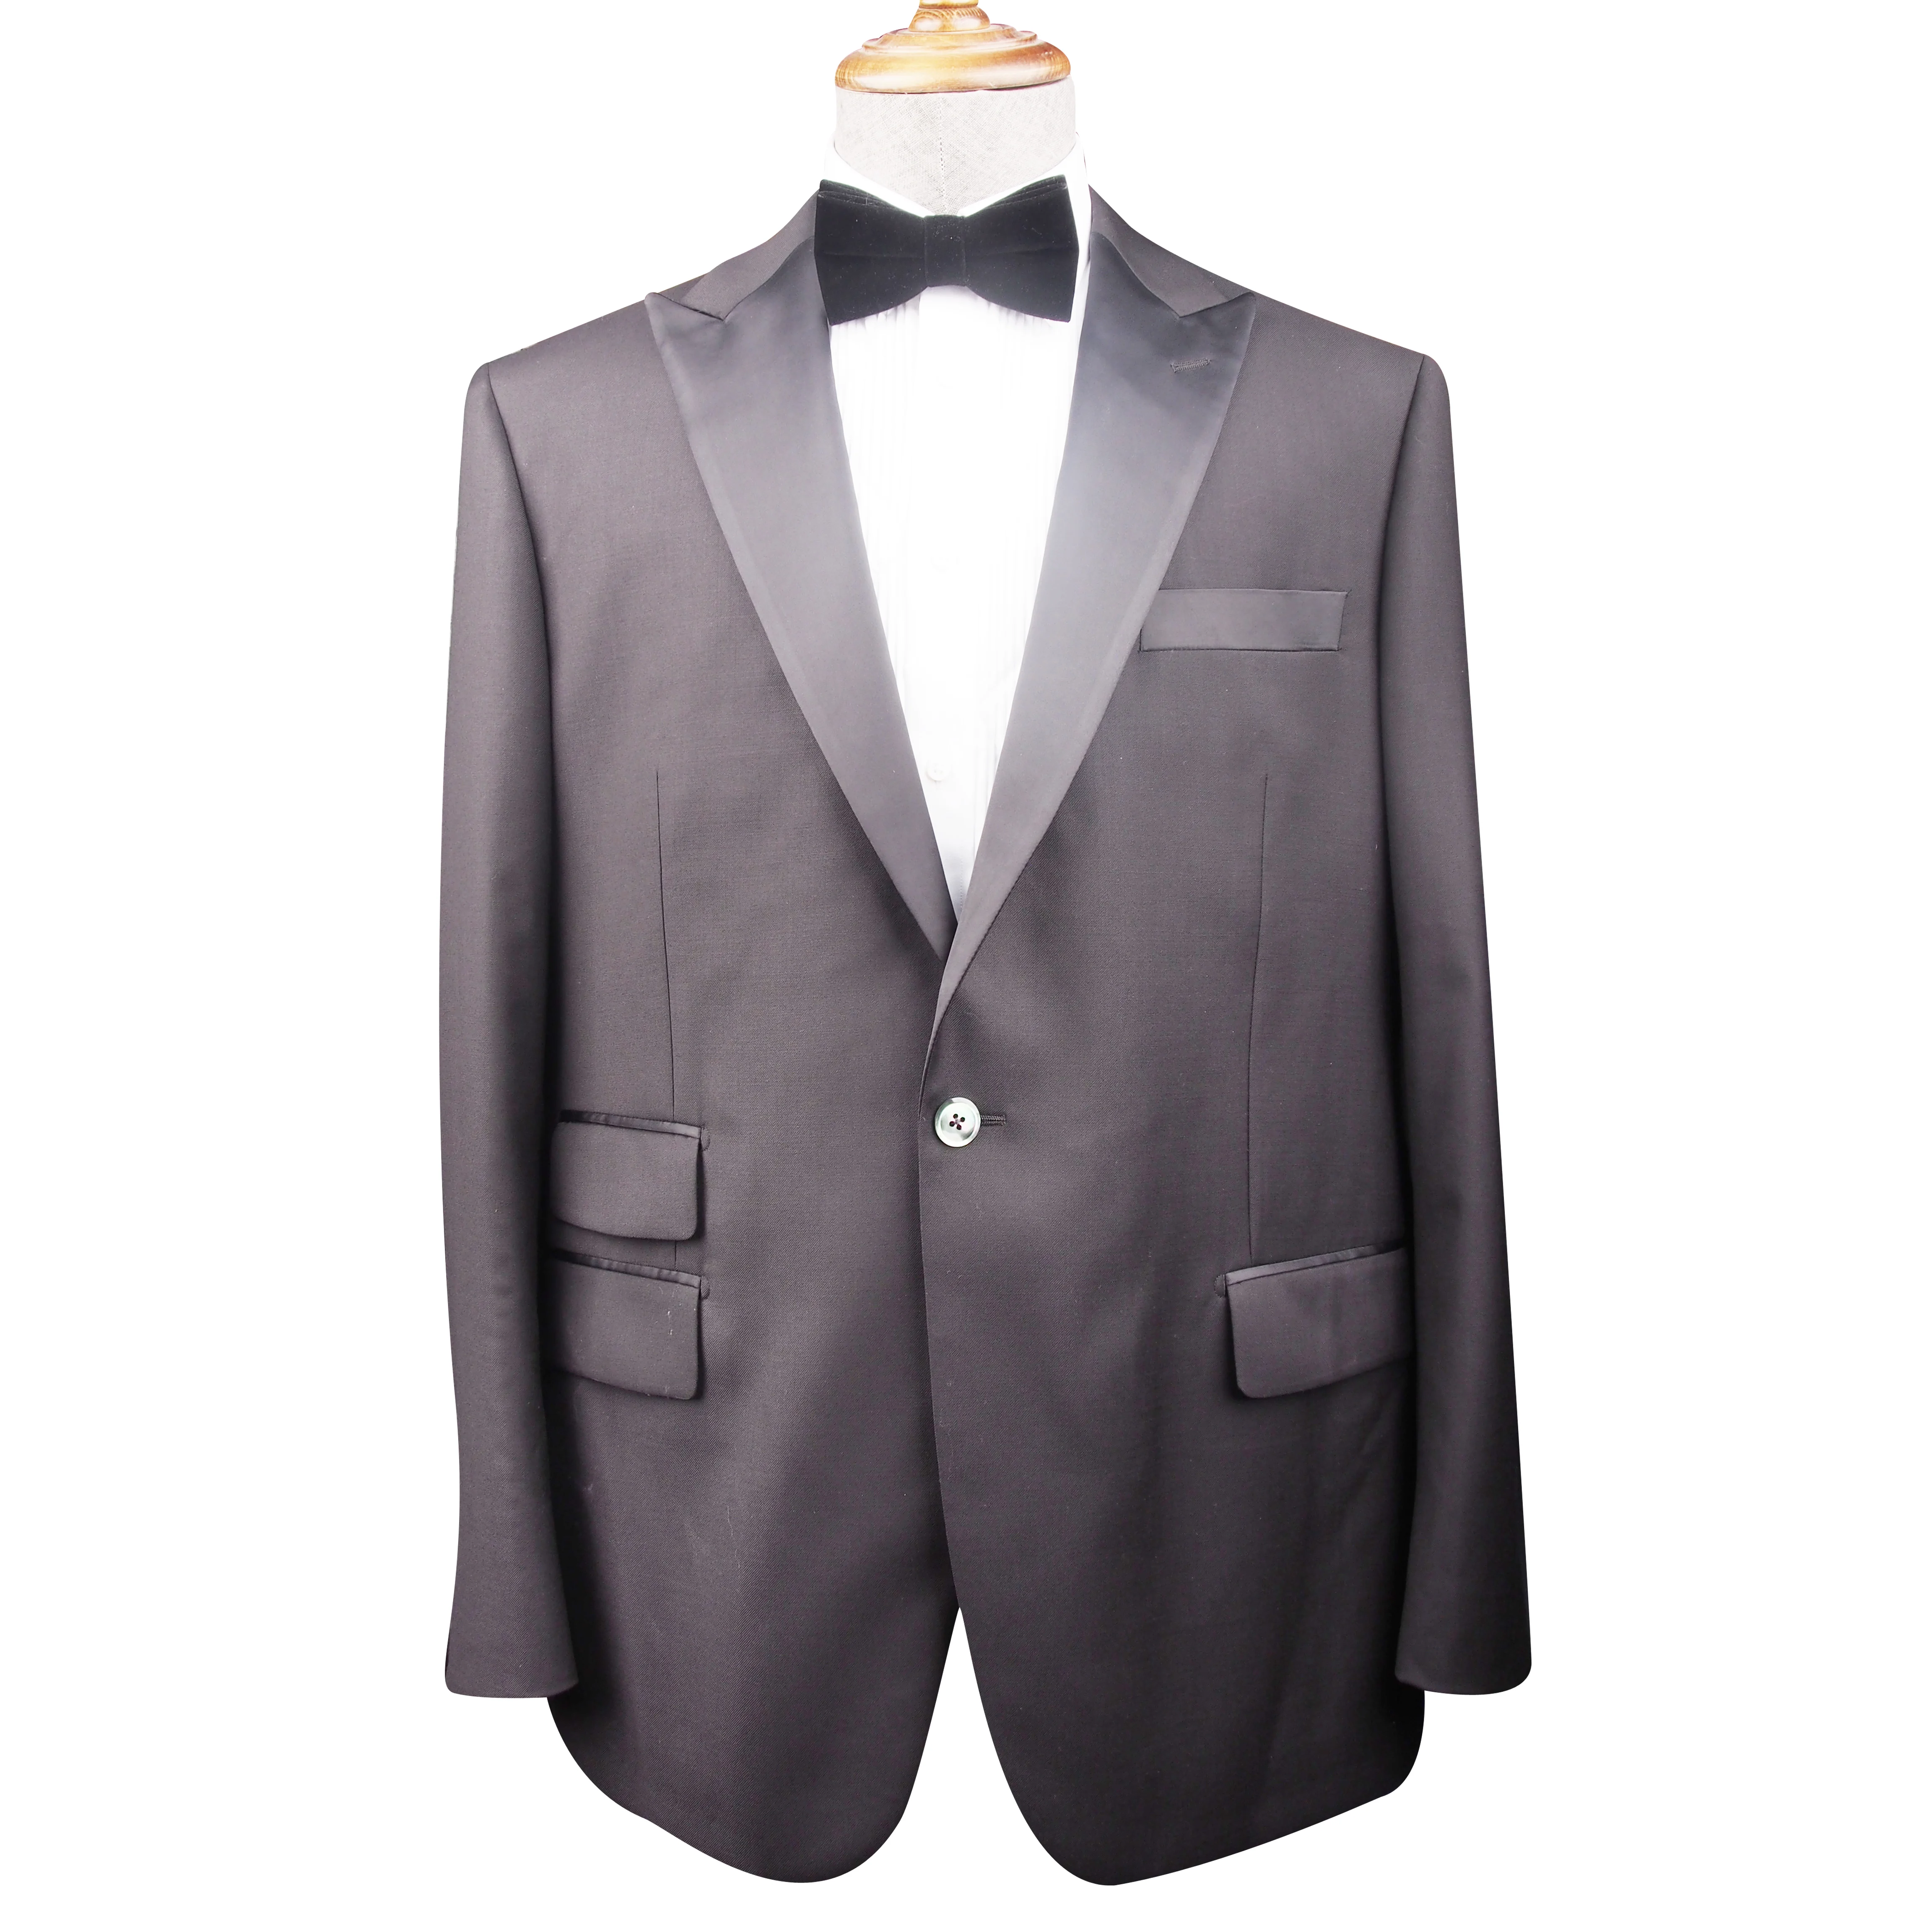 made in China wholesale 2 pièces 100% Wool  Tuxedo Suit modern men’s suit